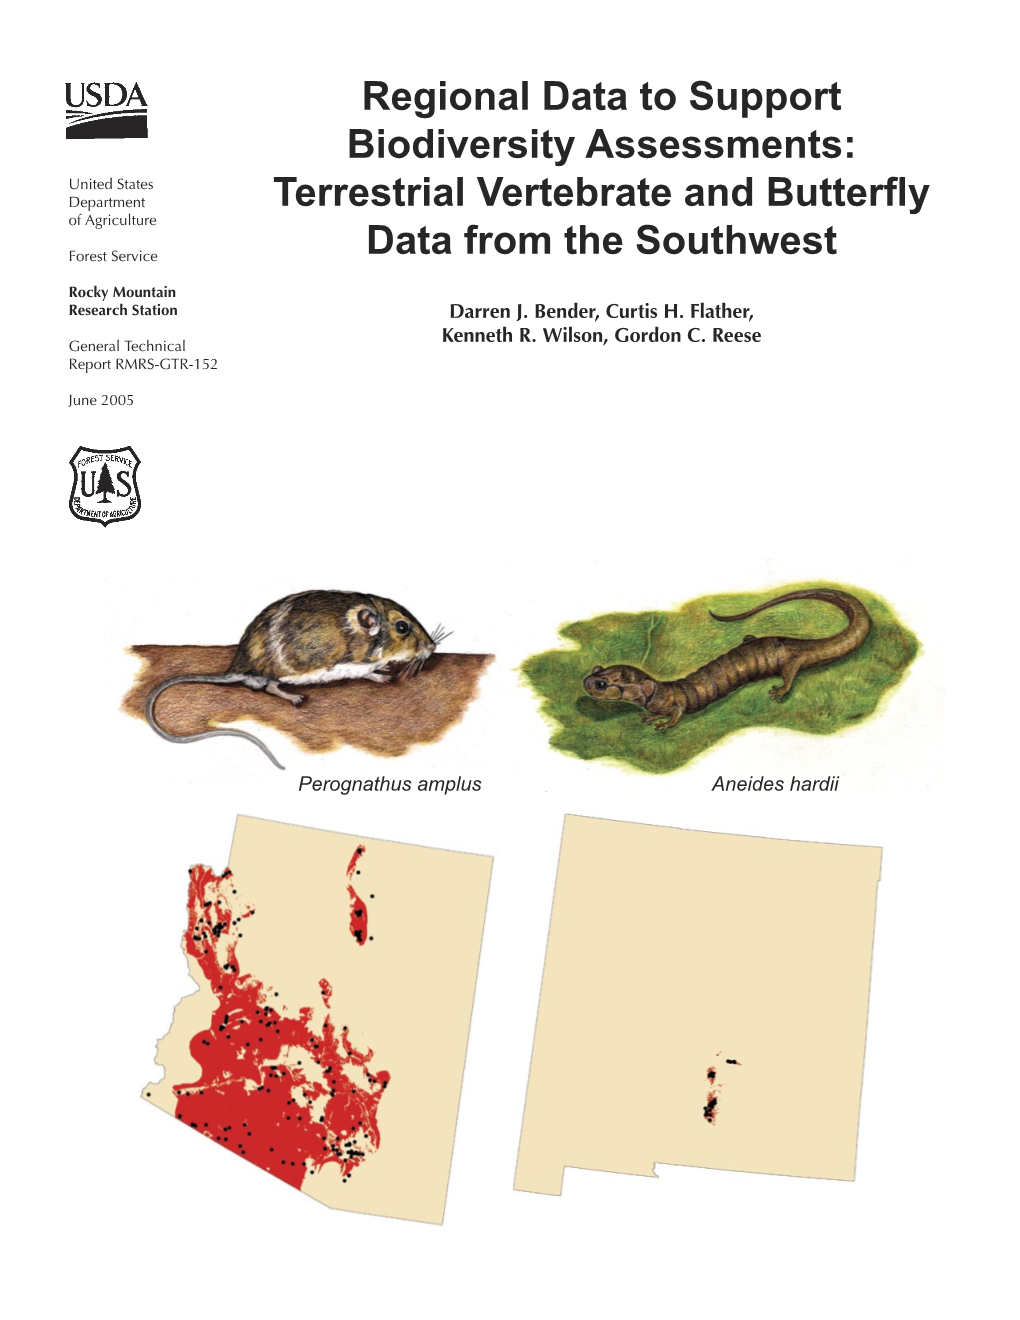 Regional Data to Support Biodiversity Assessments: Terrestrial Vertebrate and Butterﬂy Data from the Southwest